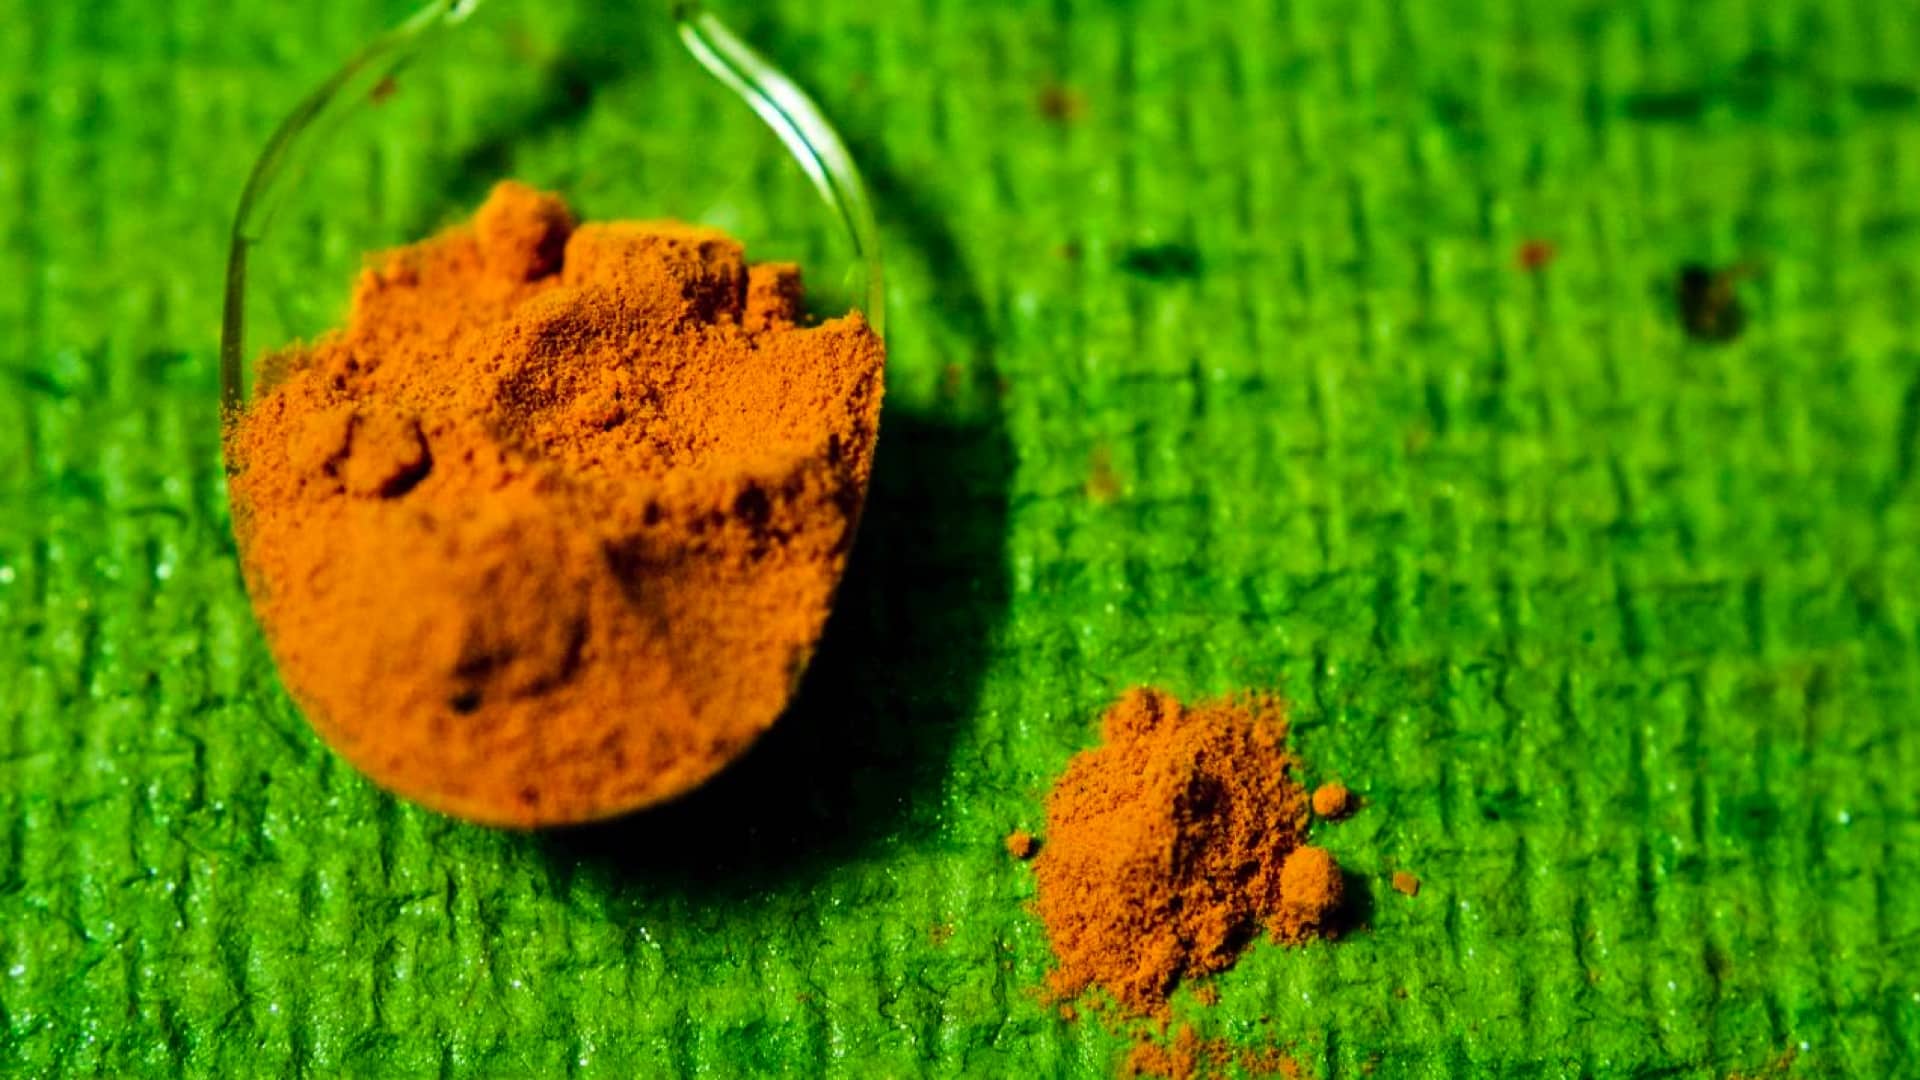 Speeding Recovery from Surgery with Turmeric